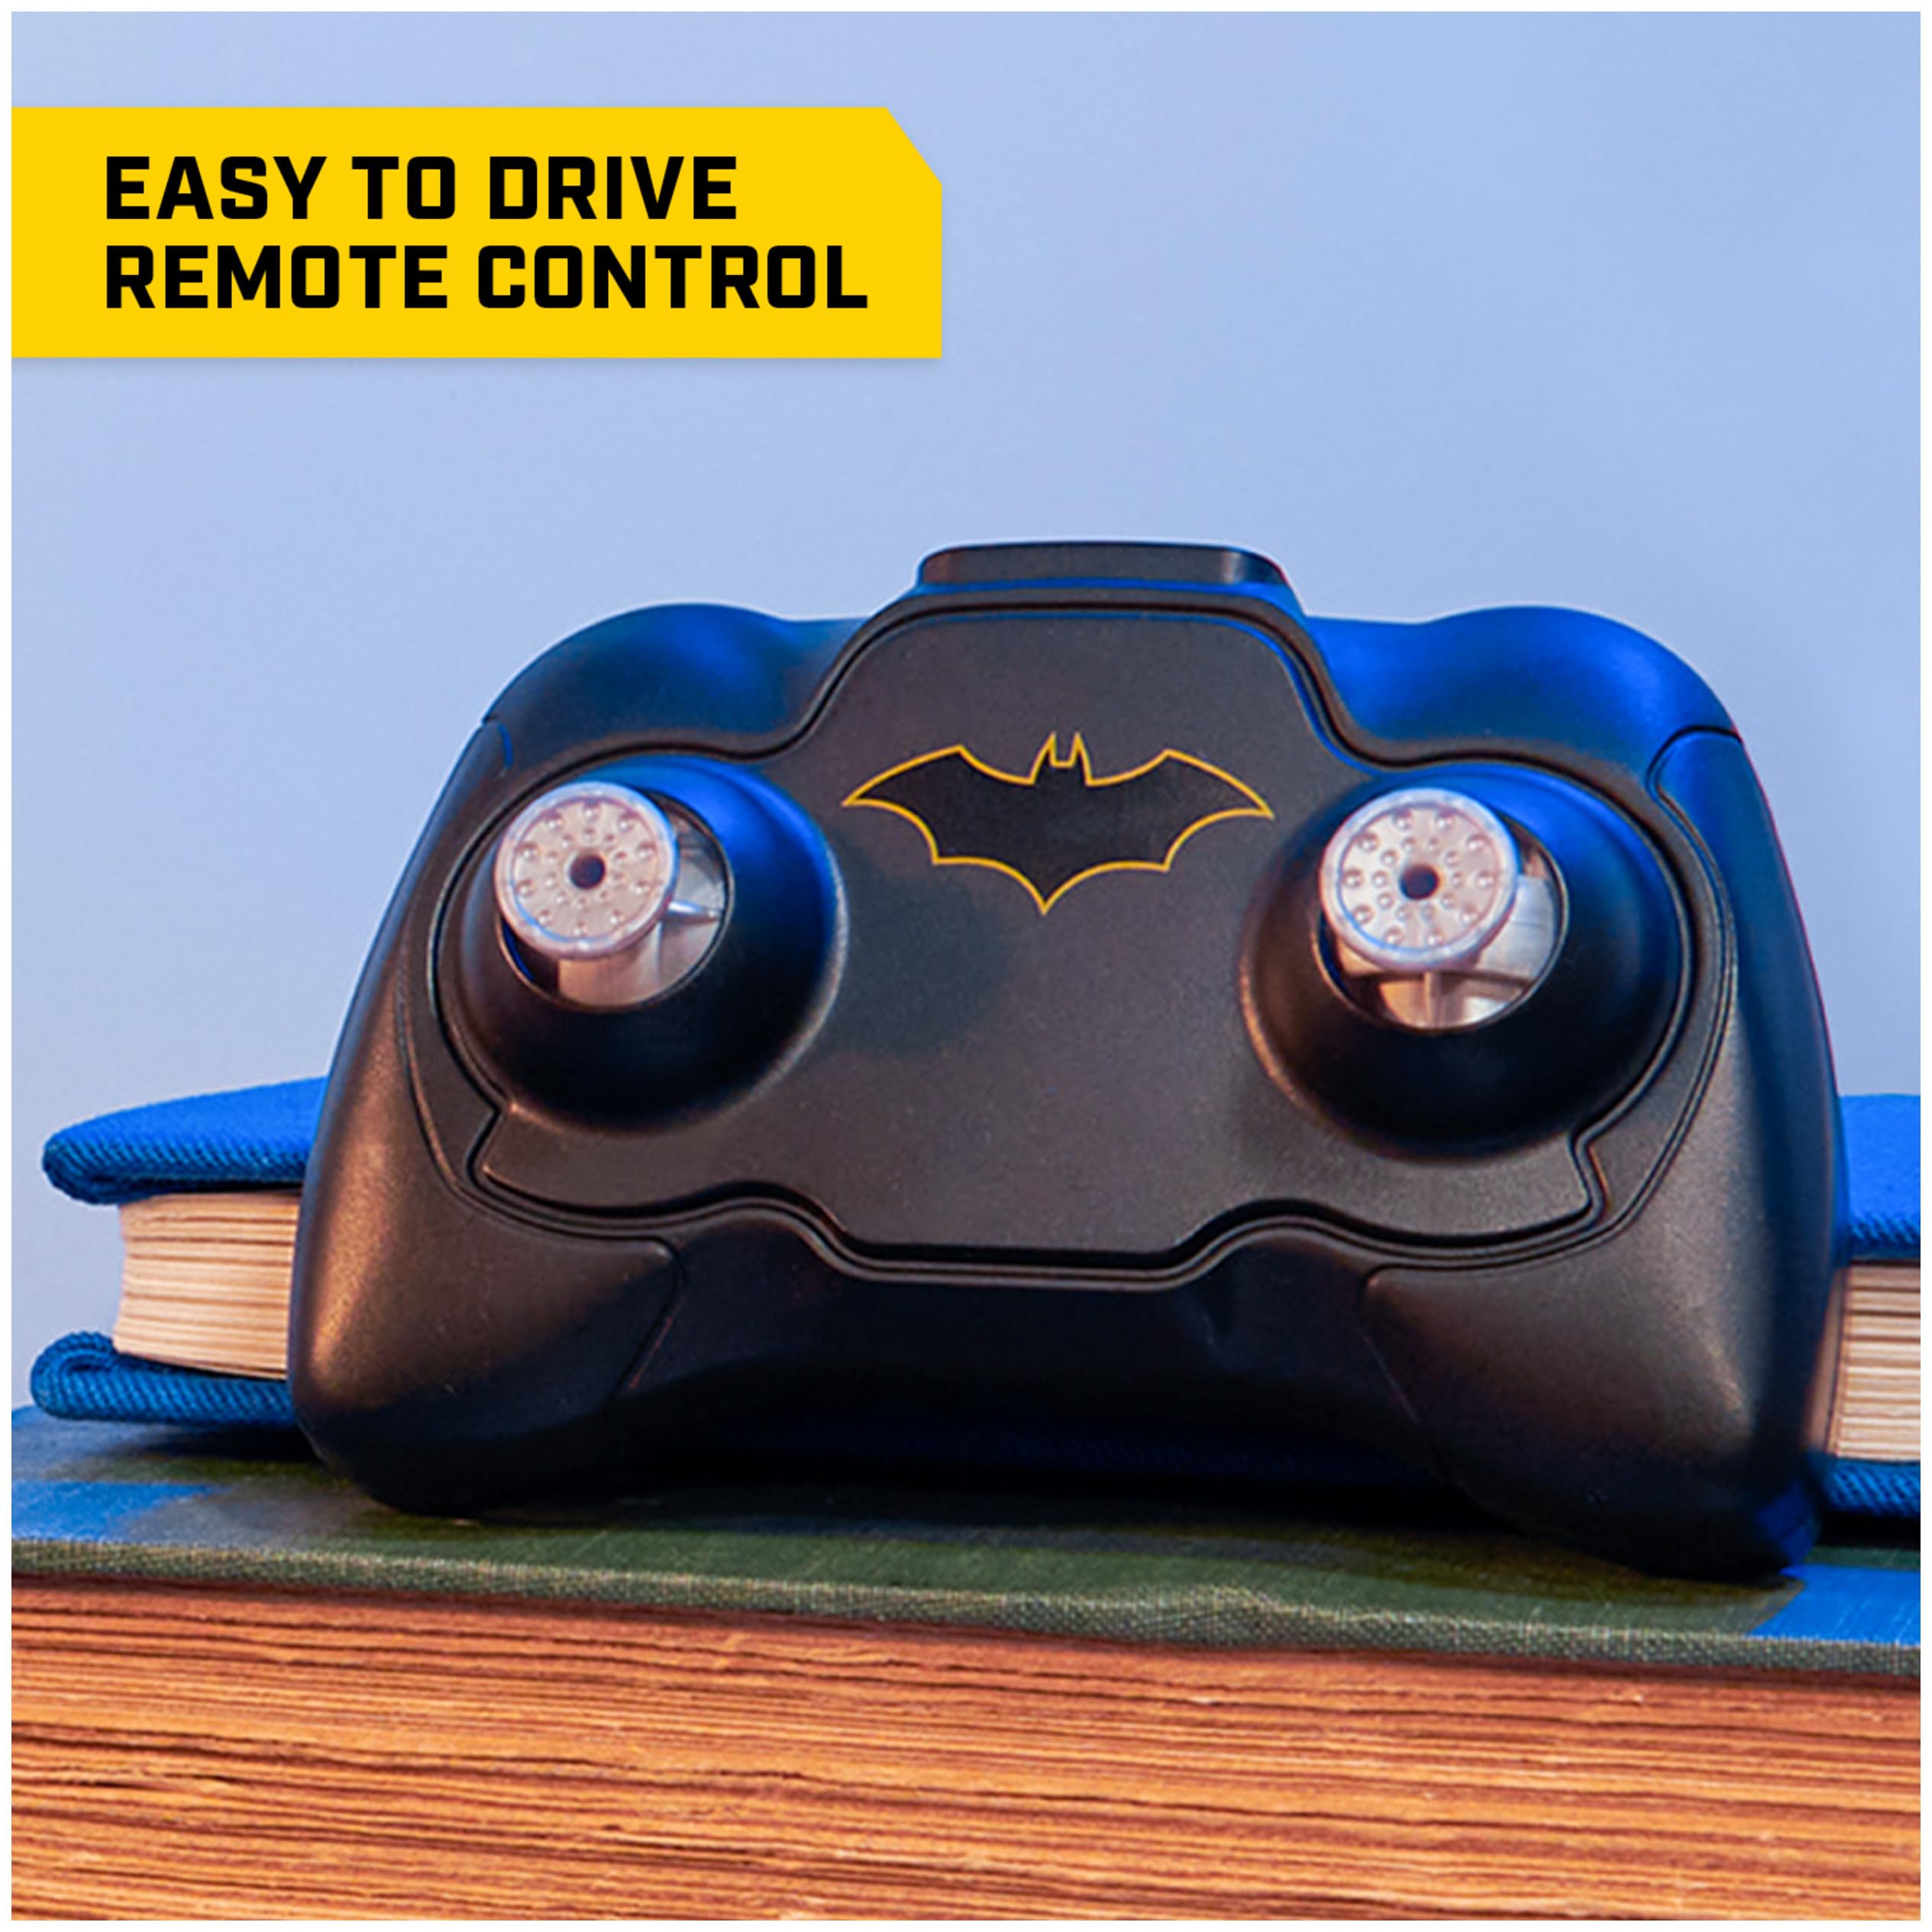 DC Comics, Batman Batmobile Remote Control Car, Easy to Drive with 4-inch Batman Figure, Kids Toys for Boys and Girls Ages 4 and Up